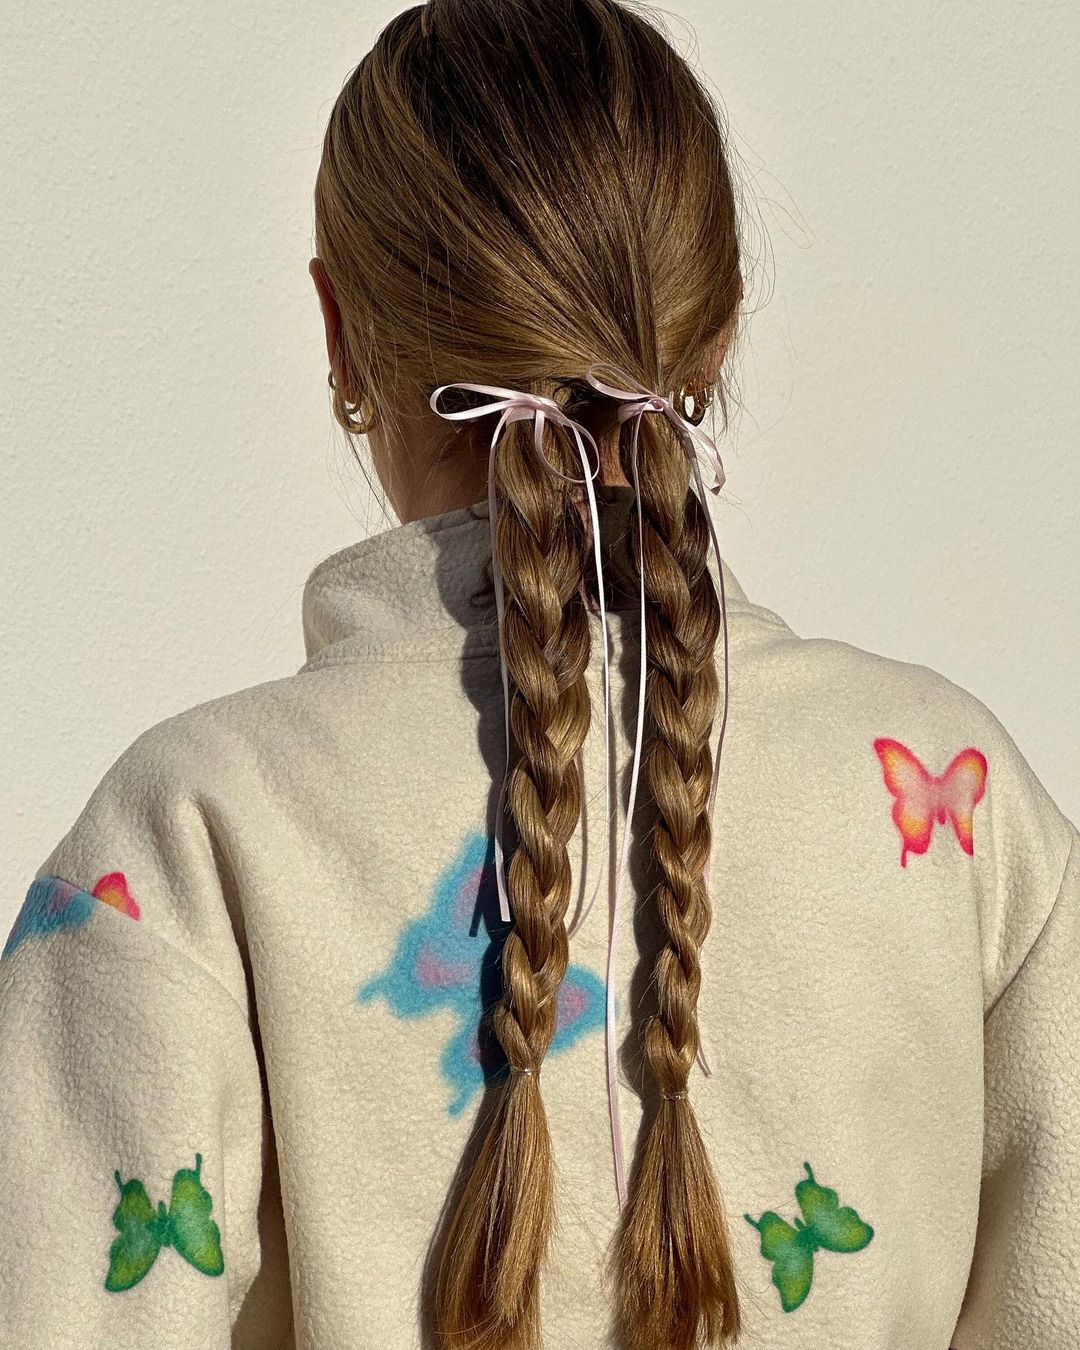 criss cross braided pigtails